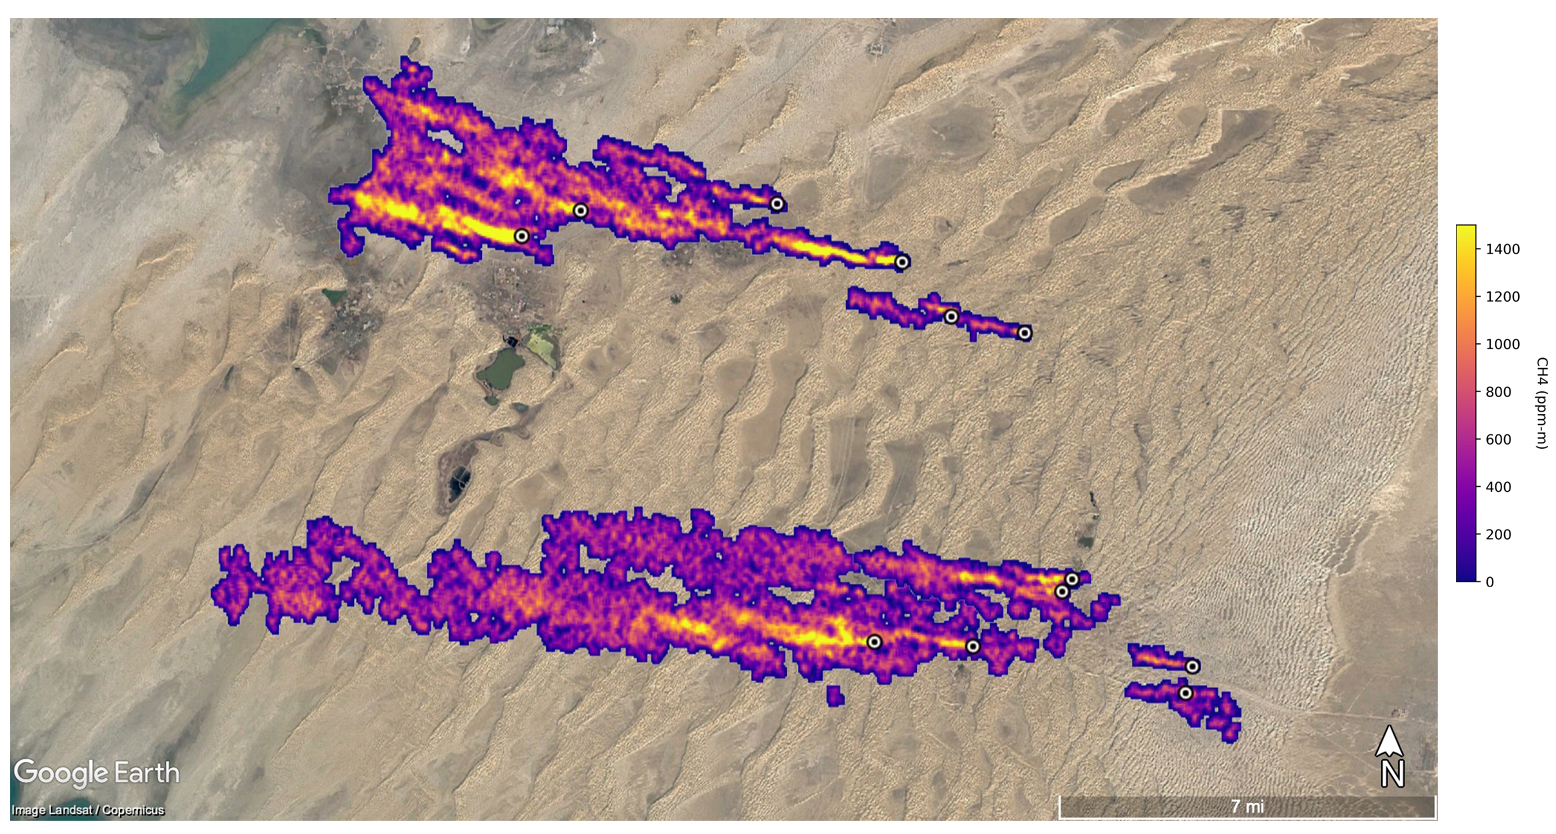 Twelve plumes of methane that were detected by NASA’s Earth Surface Mineral Dust Source Investigation tool east of Hazar, Turkmenistan, a port city on the Caspian Sea.